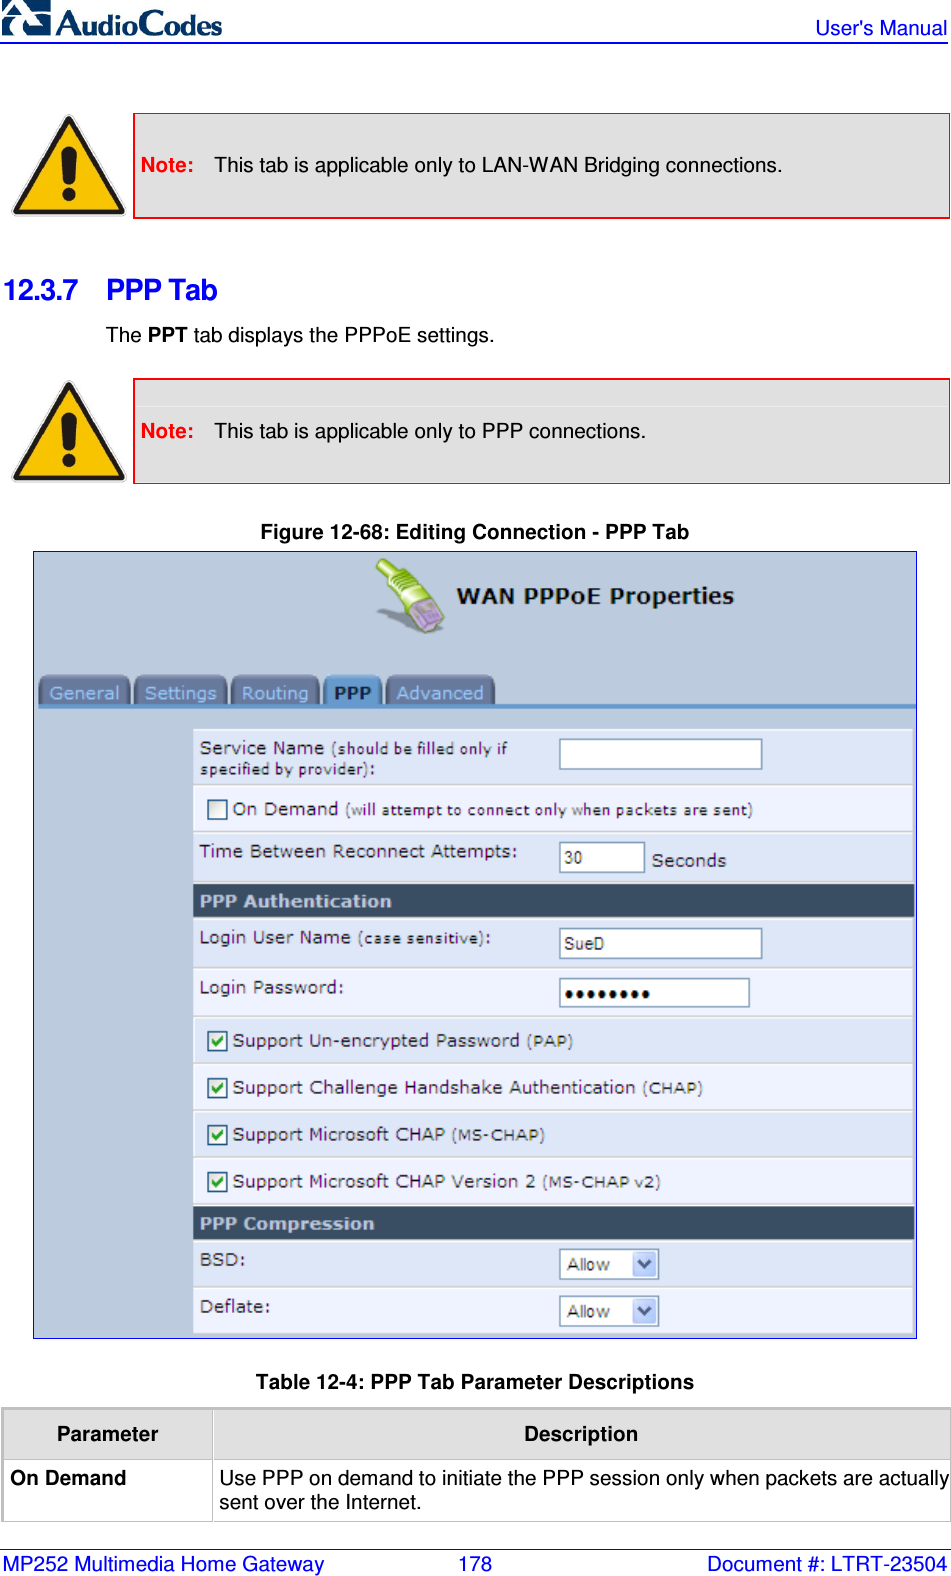 MP252 Multimedia Home Gateway  178  Document #: LTRT-23504   User&apos;s Manual    Note:  This tab is applicable only to LAN-WAN Bridging connections.  12.3.7  PPP Tab The PPT tab displays the PPPoE settings.   Note:  This tab is applicable only to PPP connections.  Figure 12-68: Editing Connection - PPP Tab  Table 12-4: PPP Tab Parameter Descriptions Parameter  Description On Demand Use PPP on demand to initiate the PPP session only when packets are actually sent over the Internet. 